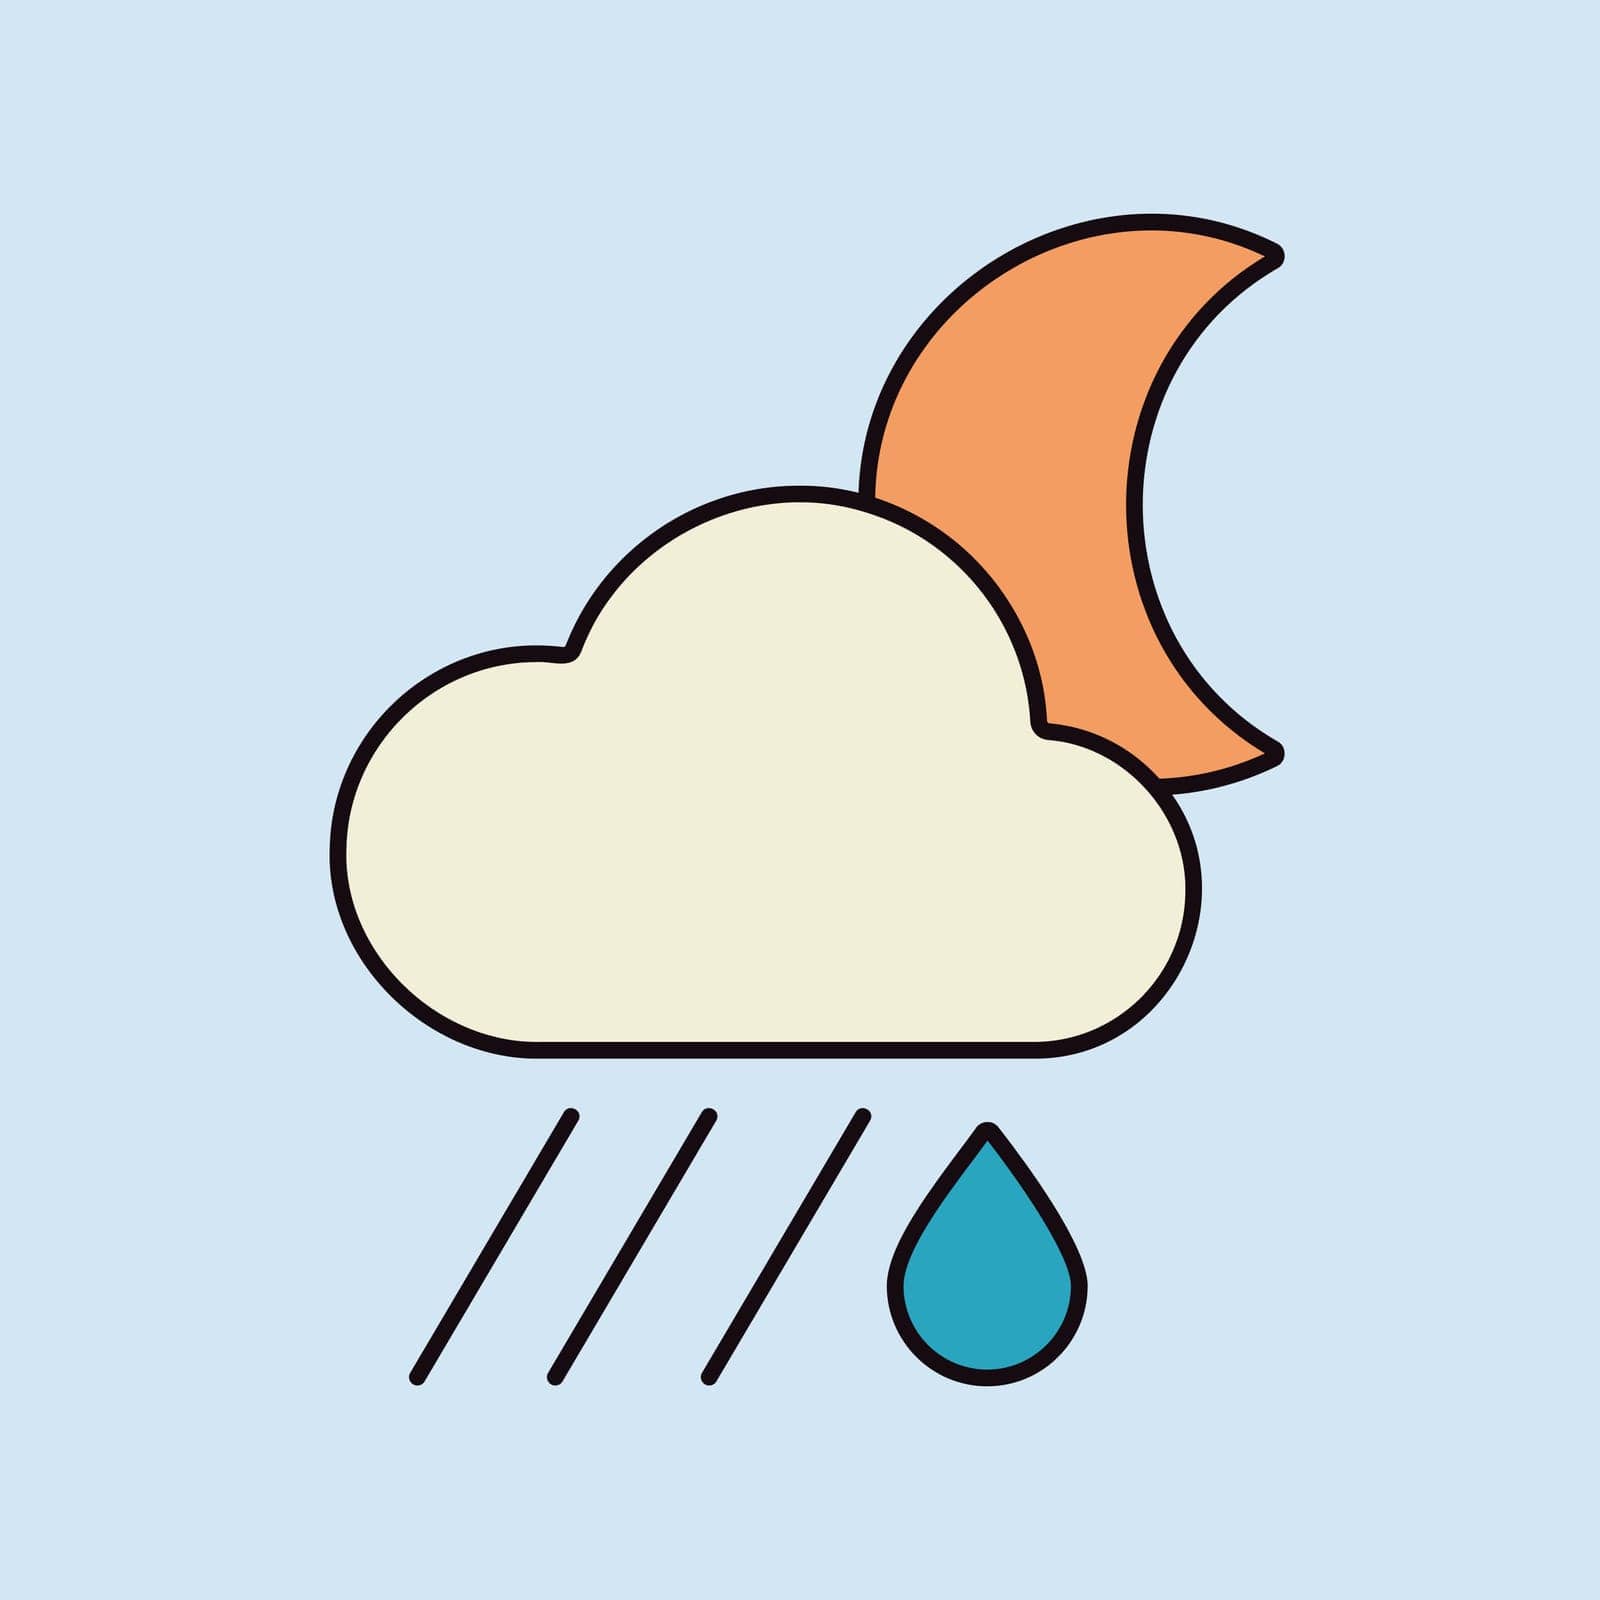 Raincloud with raindrop moon icon. Weather sign by nosik